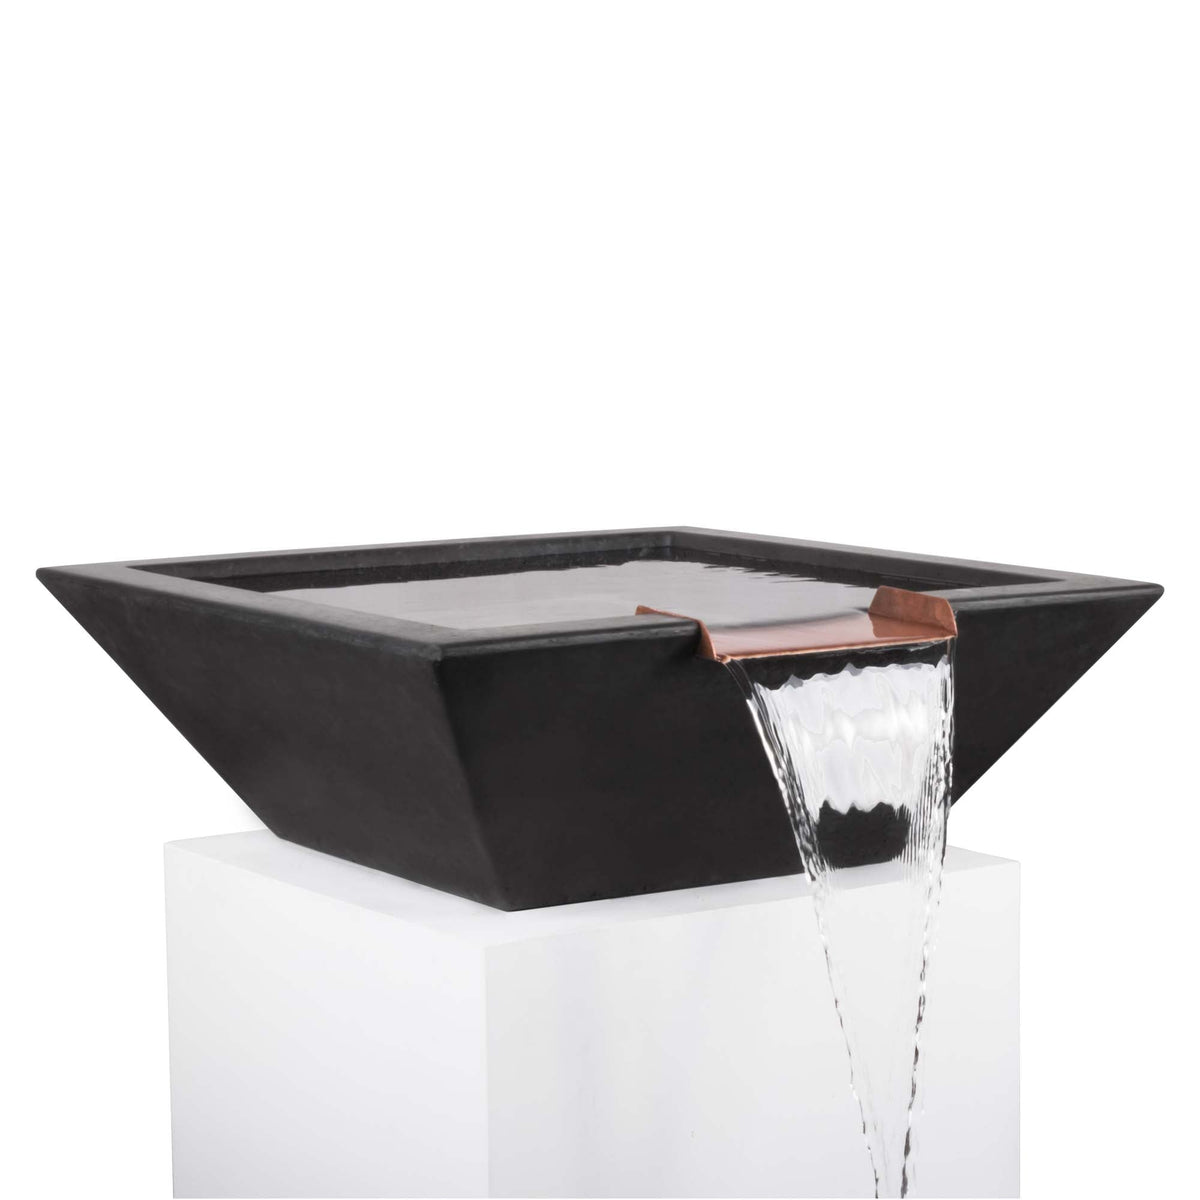 The Outdoor Plus Maya GFRC Concrete Square Water Bowl in Black